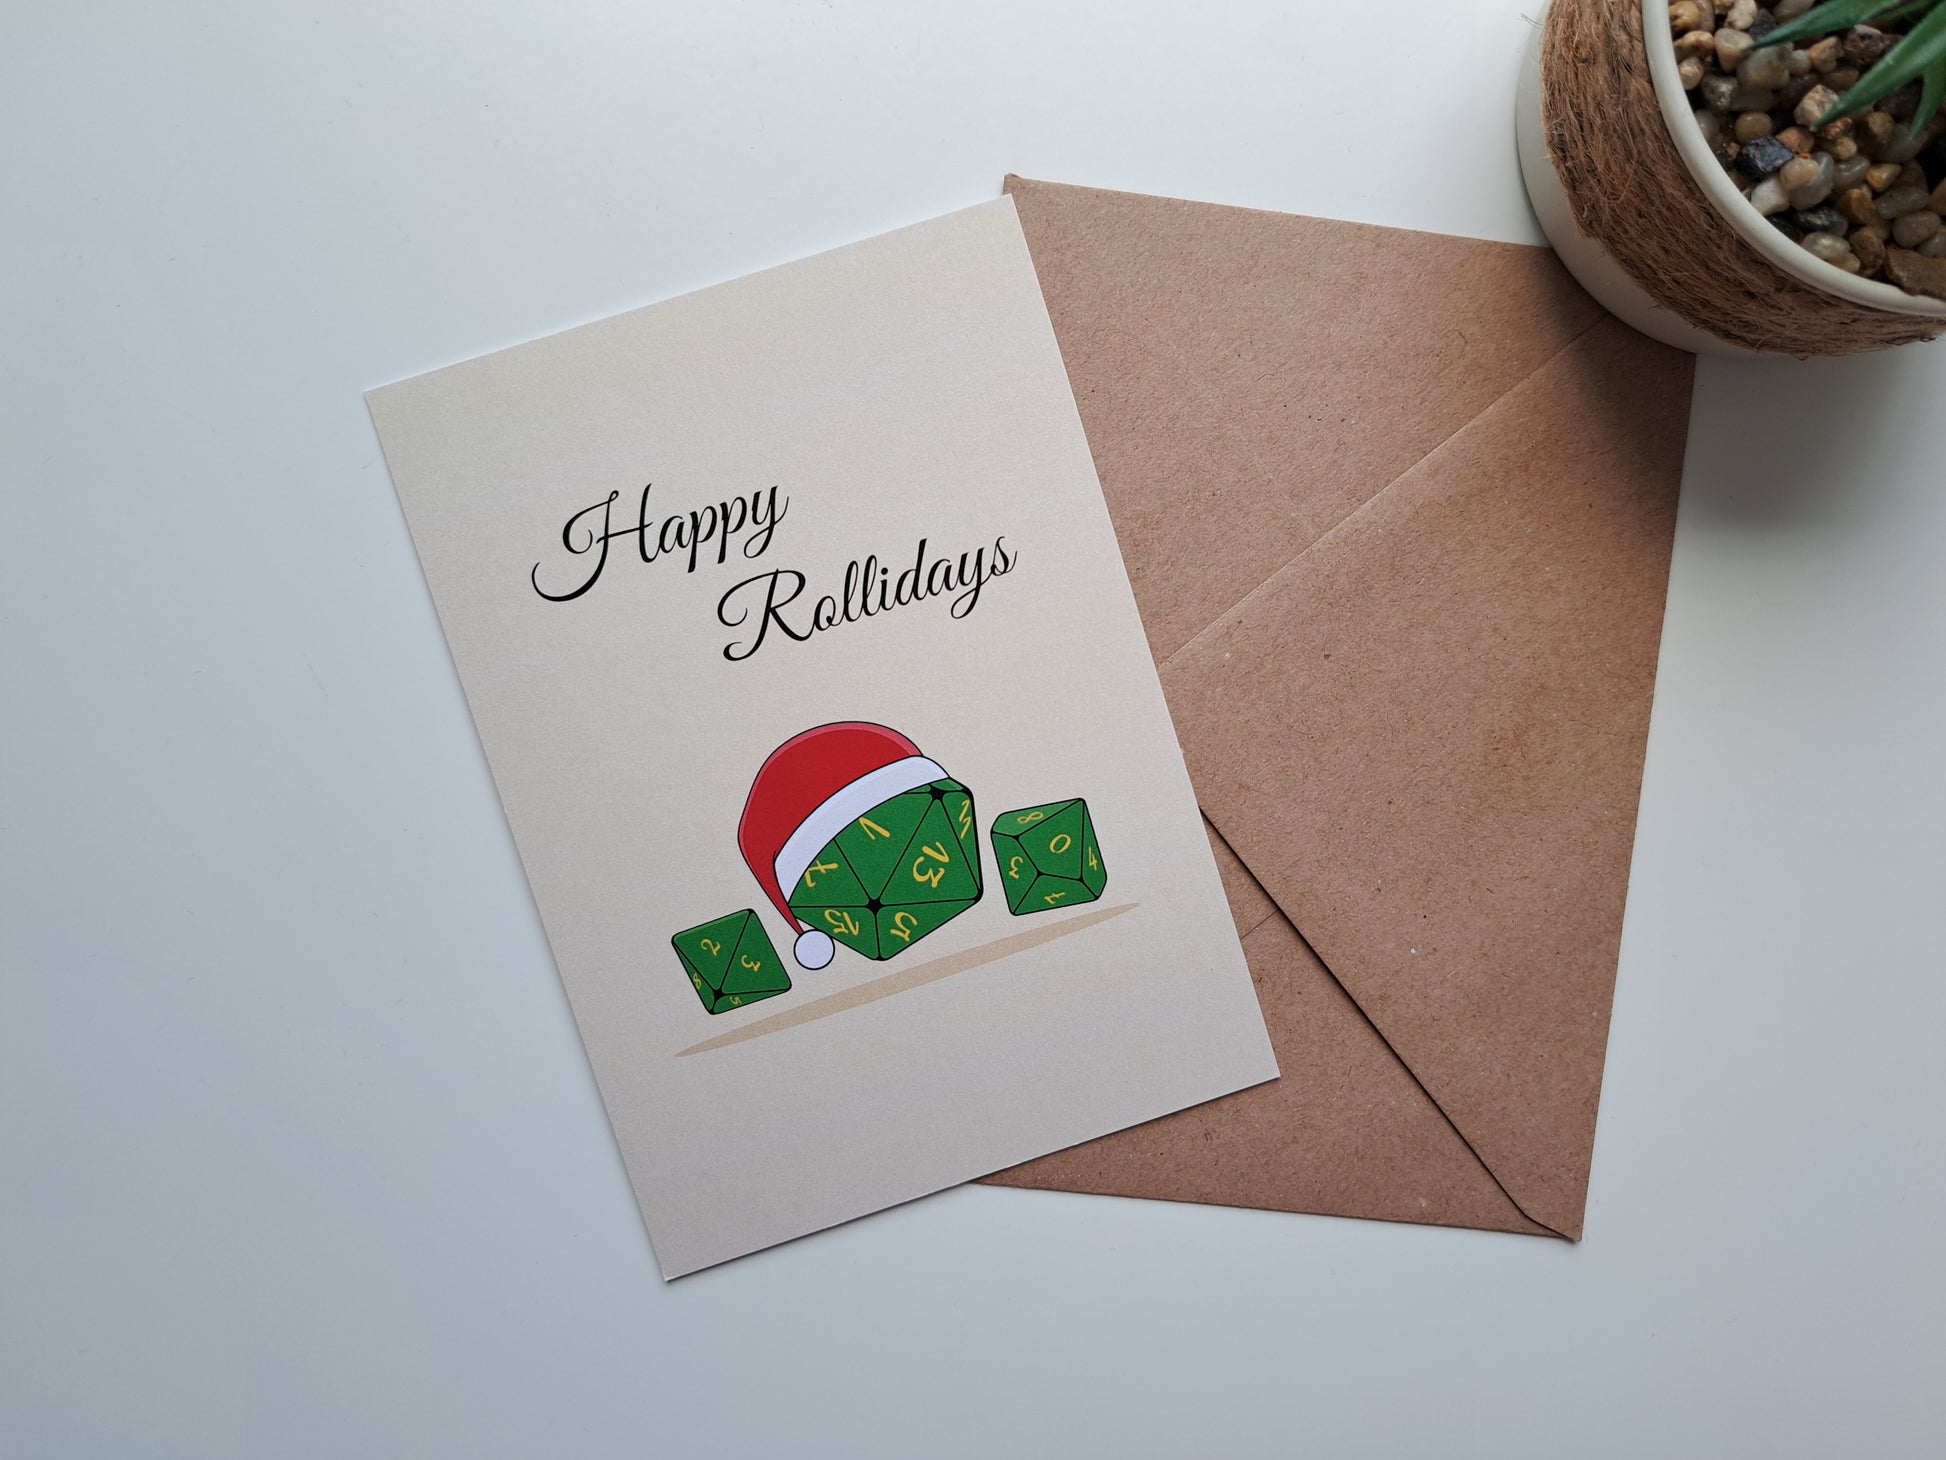 Christmas greeting card with different dice drawn and the text: Happy Rollidays